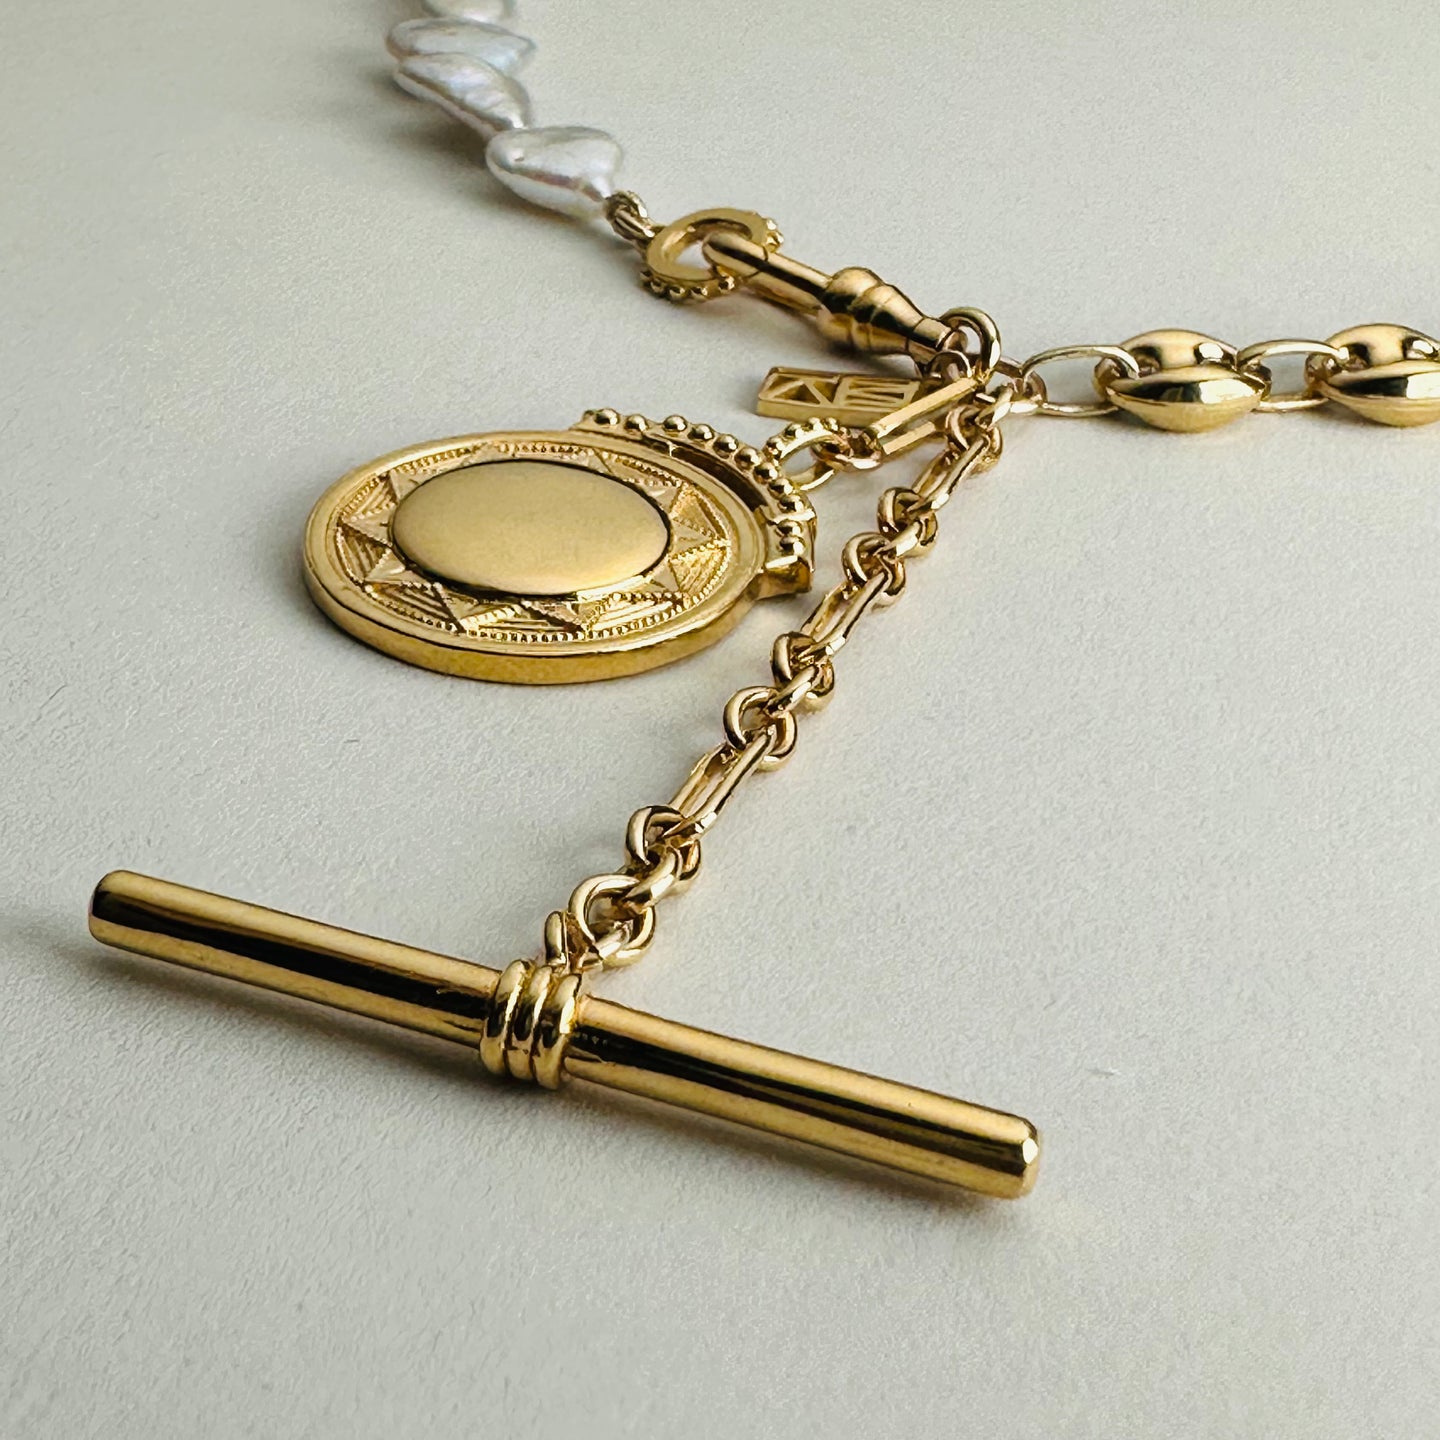 Pearl + Chain Sundial Fob Necklace